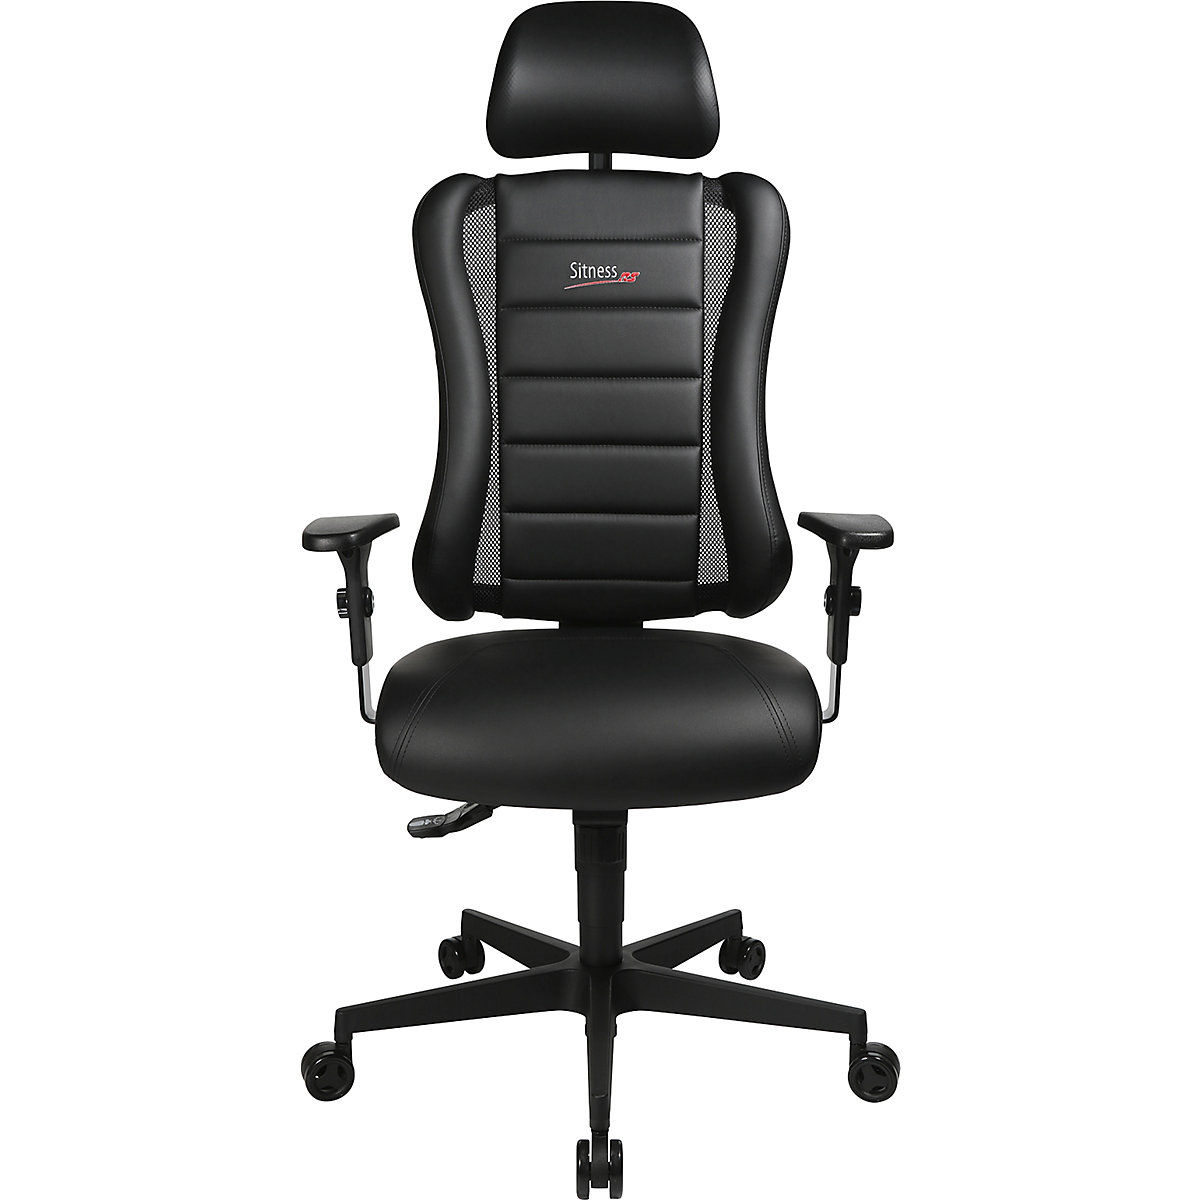 SITNESS RS office swivel chair – Topstar